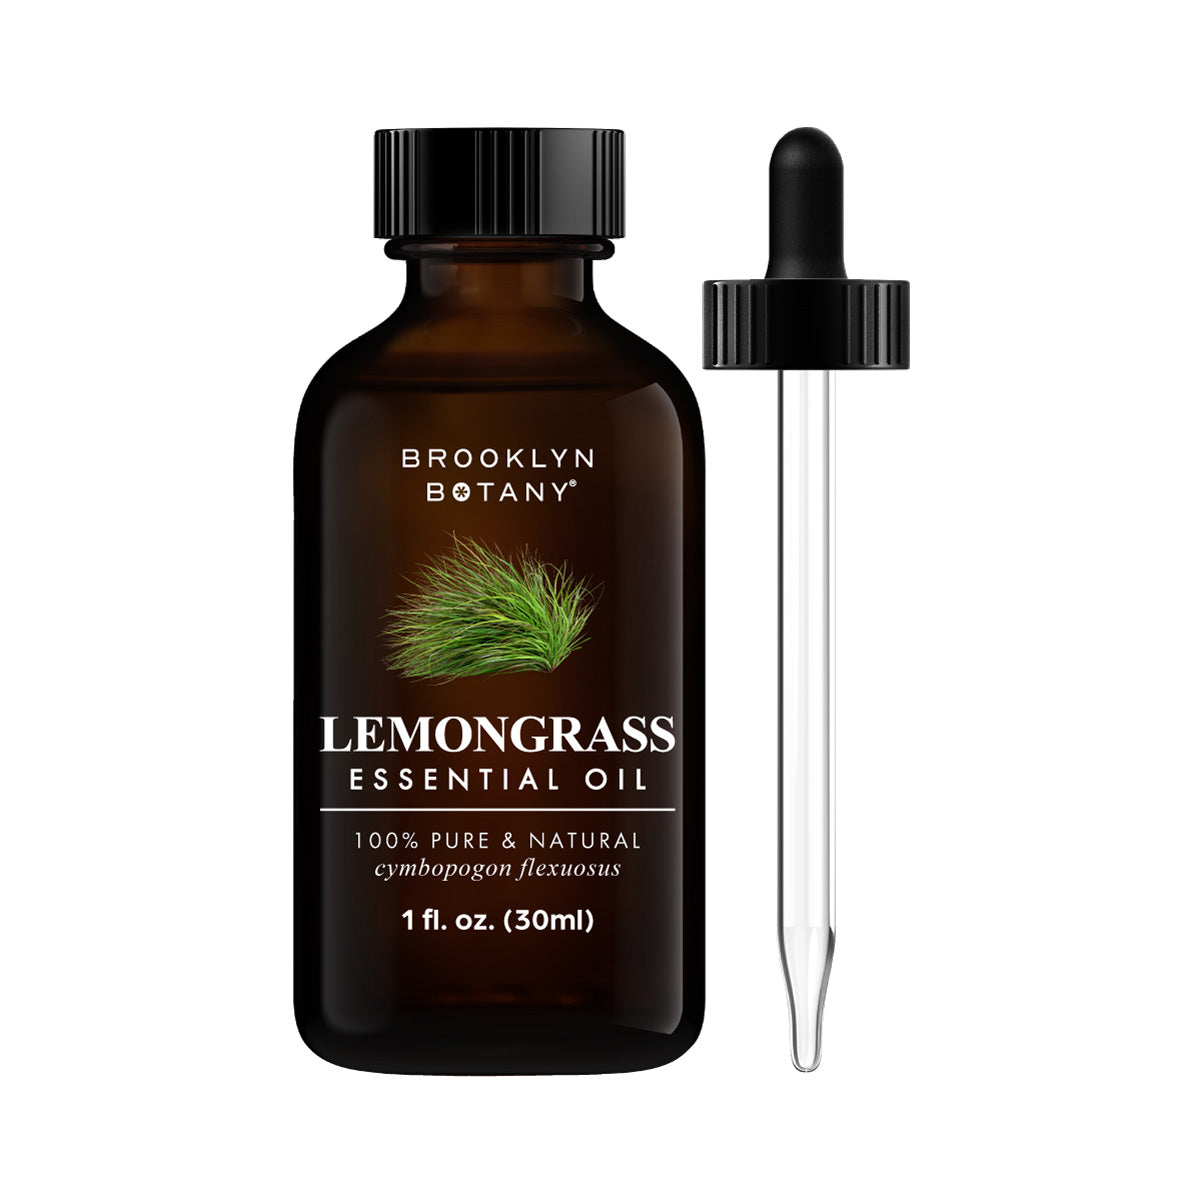 Shopify-BB-30ml-Lemongrass-Essential-Oil-Main-Image-with-Sides.jpg